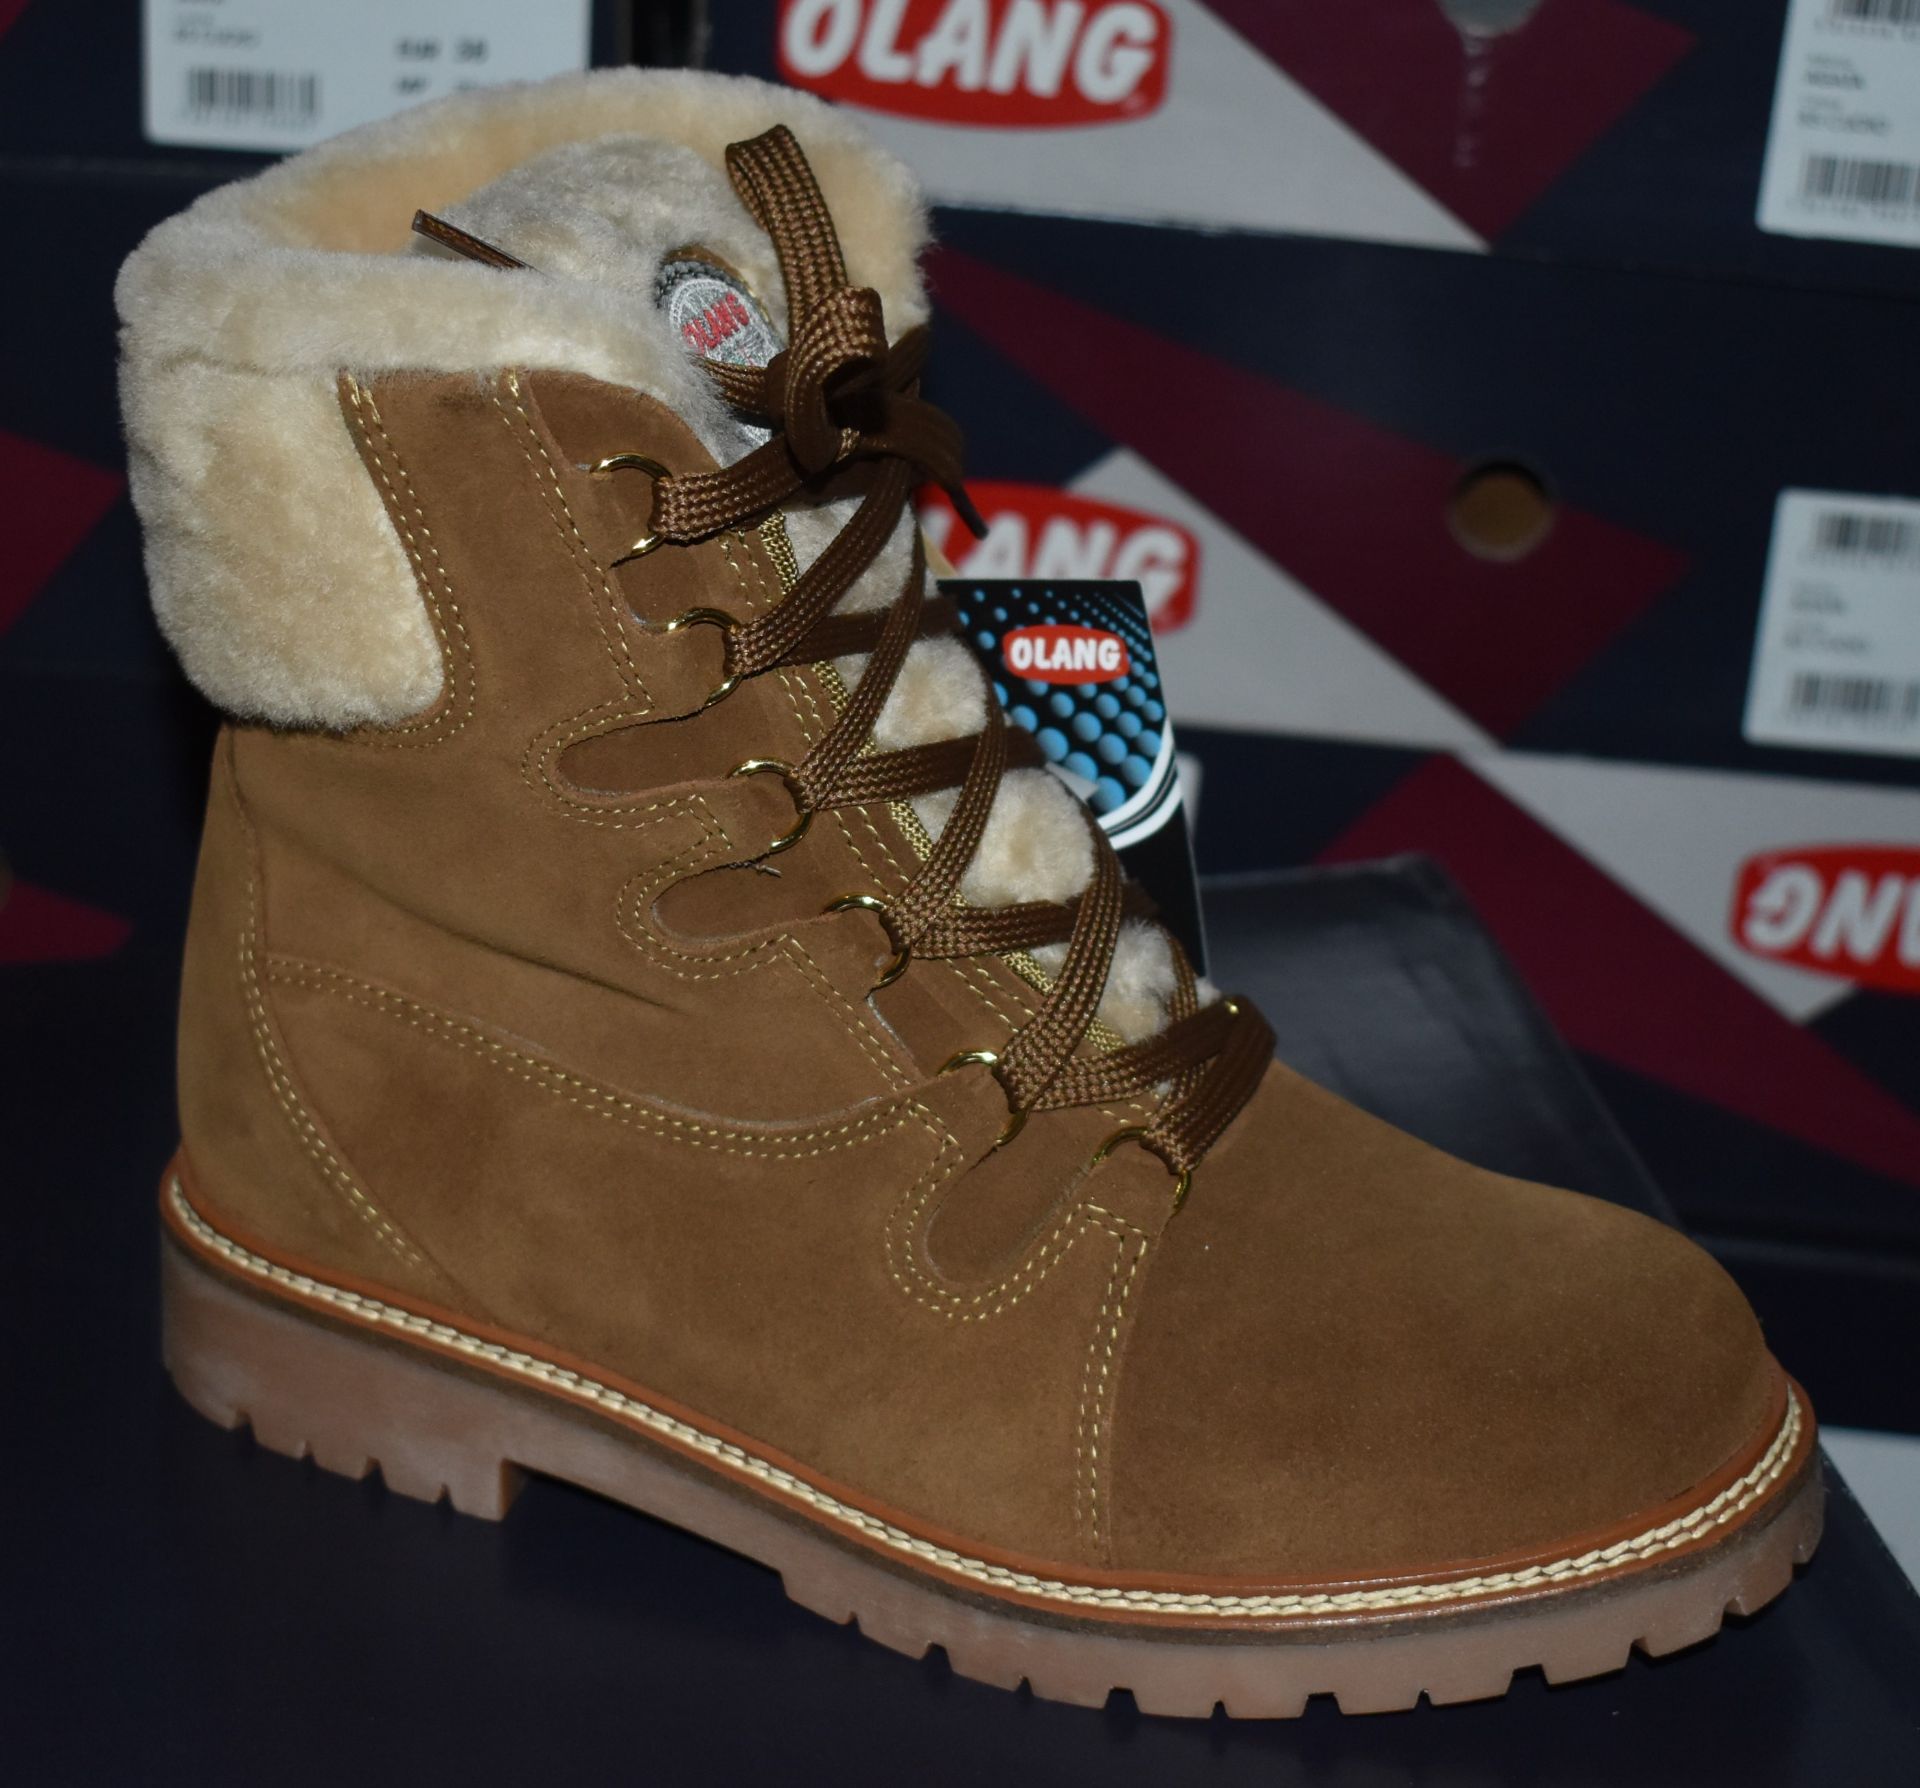 1 x Pair of Designer Olang Meribel 85 CUOIO Women's Winter Boots - Euro Size 40 - Brand New Boxed - Image 4 of 8